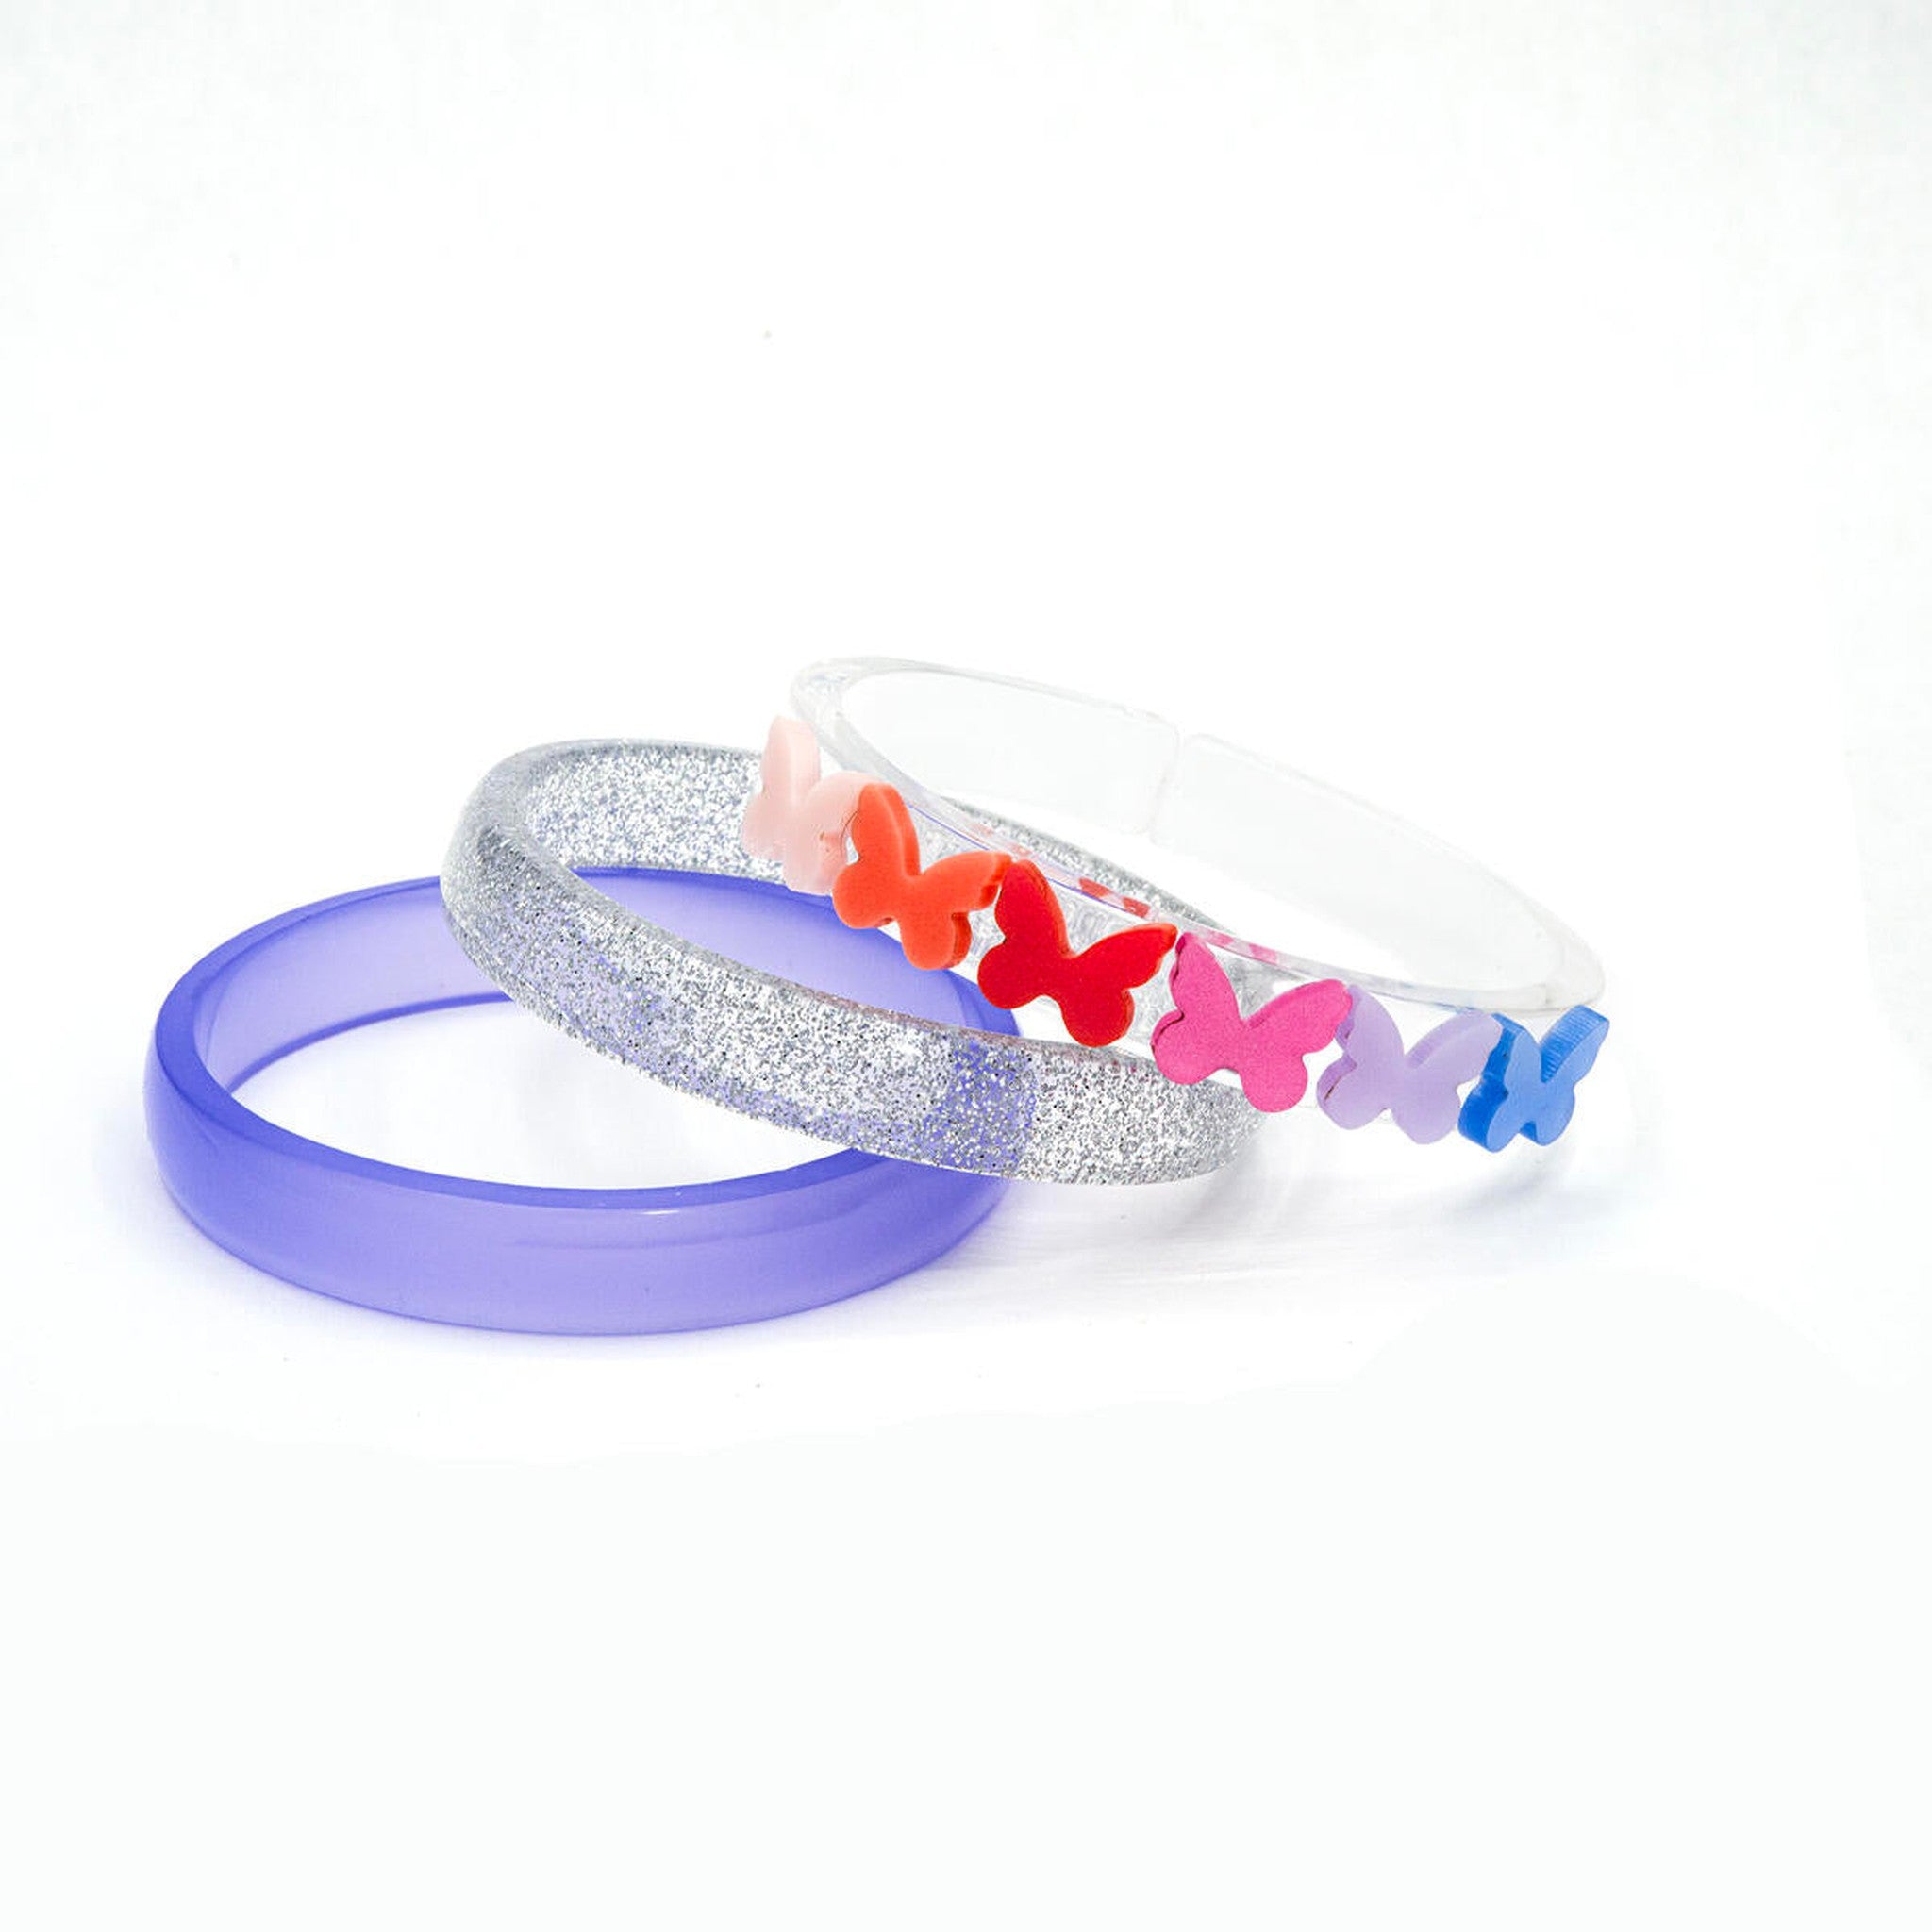 Strawberry Pearlized Bangles